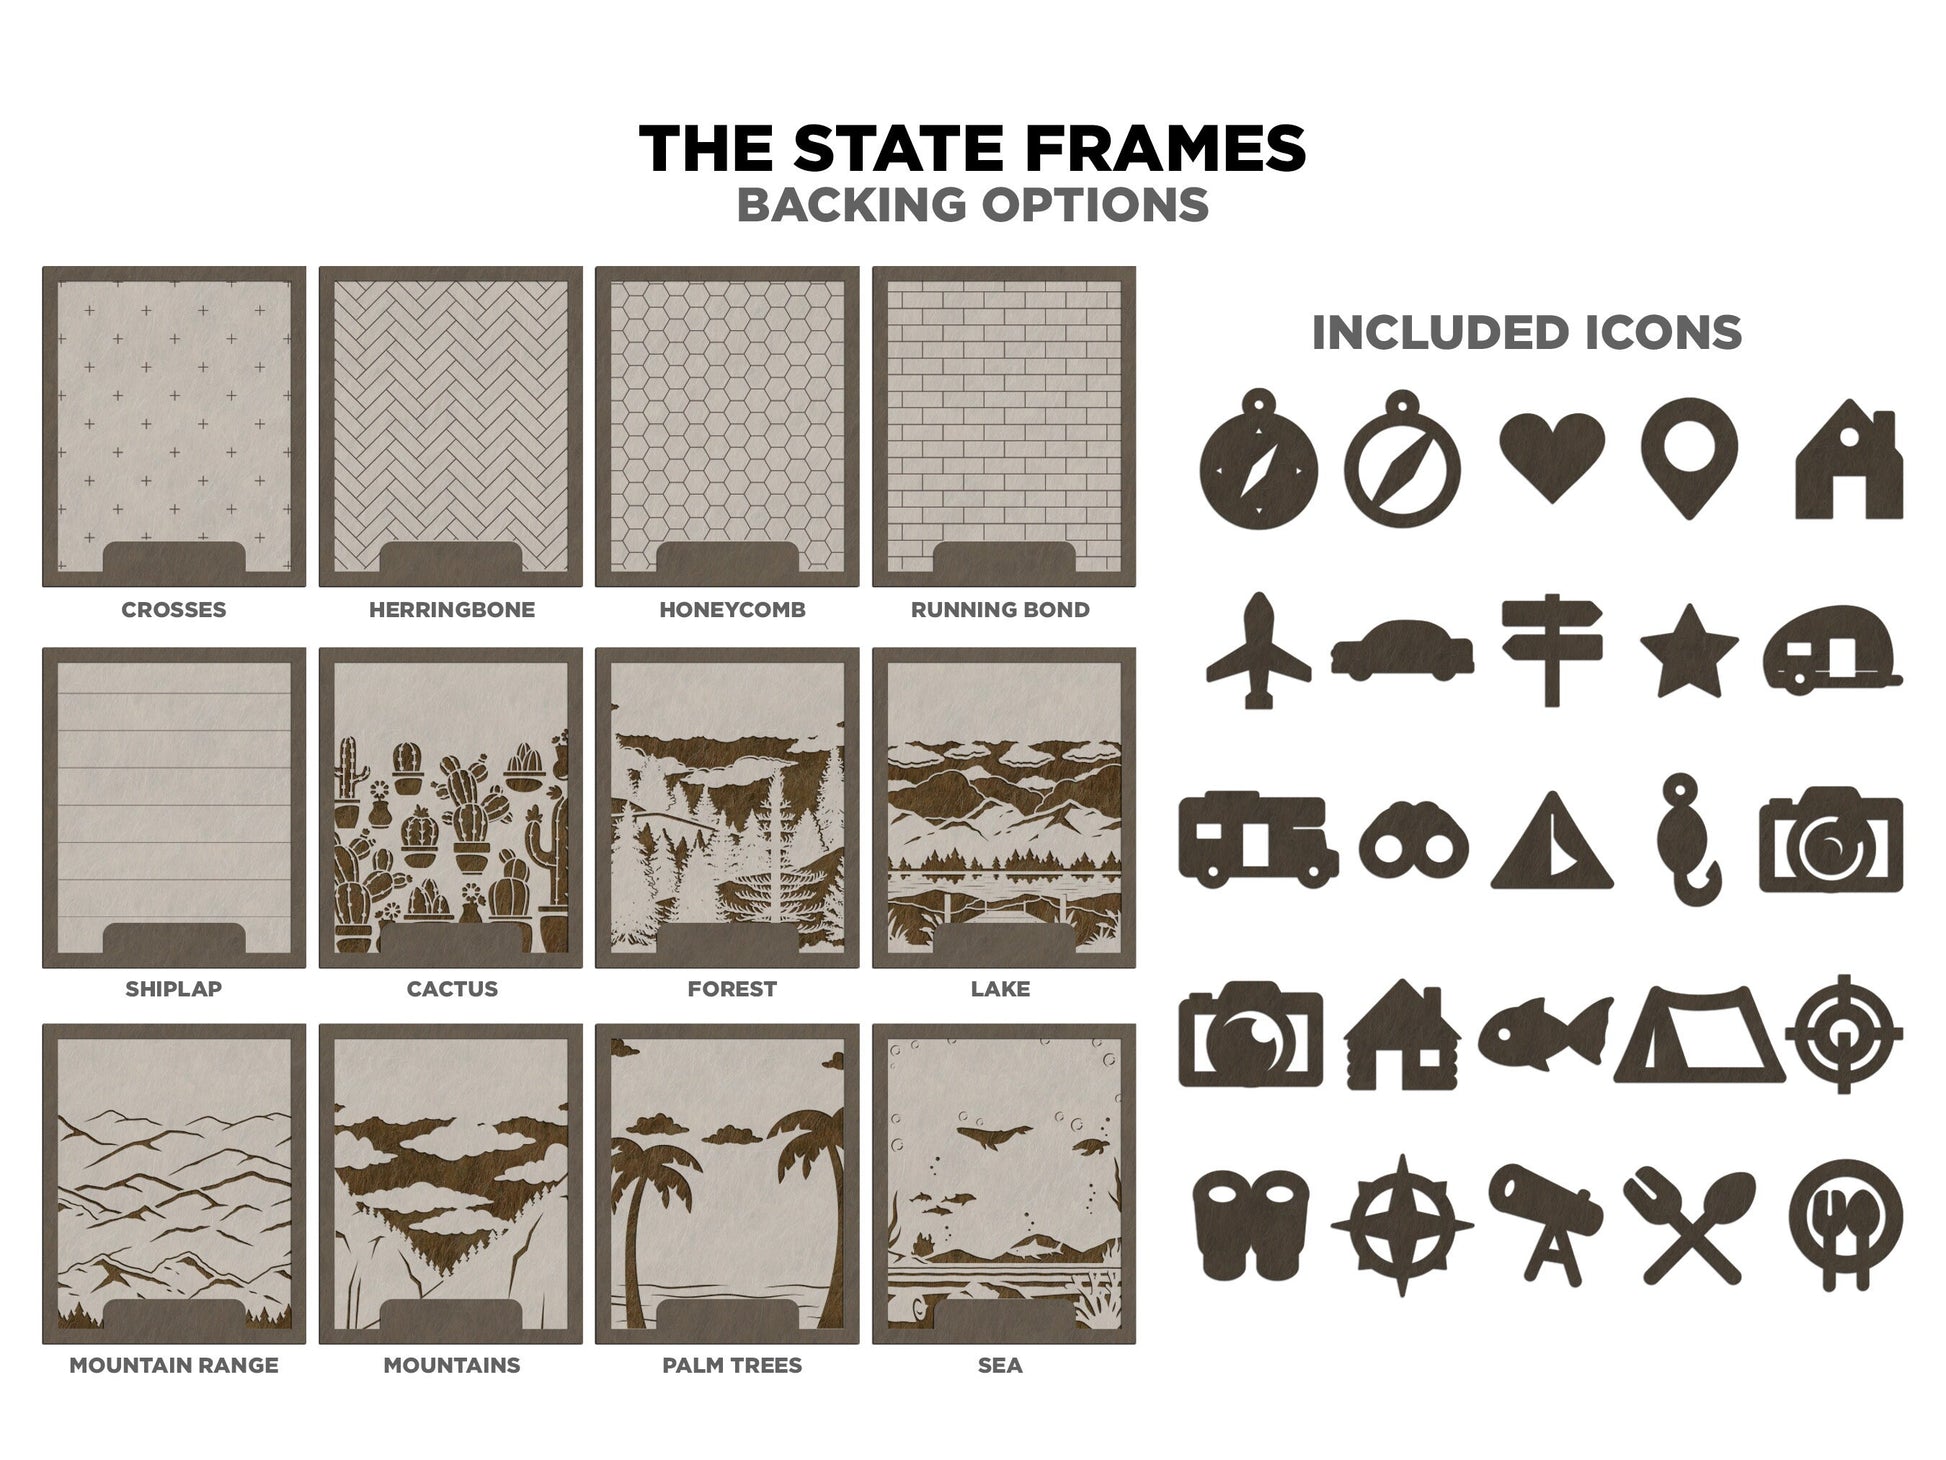 The Kansas State Frame - 13 text options, 12 backgrounds, 25 icons Included - Make over 7,500 designs - Glowforge & Lightburn Tested